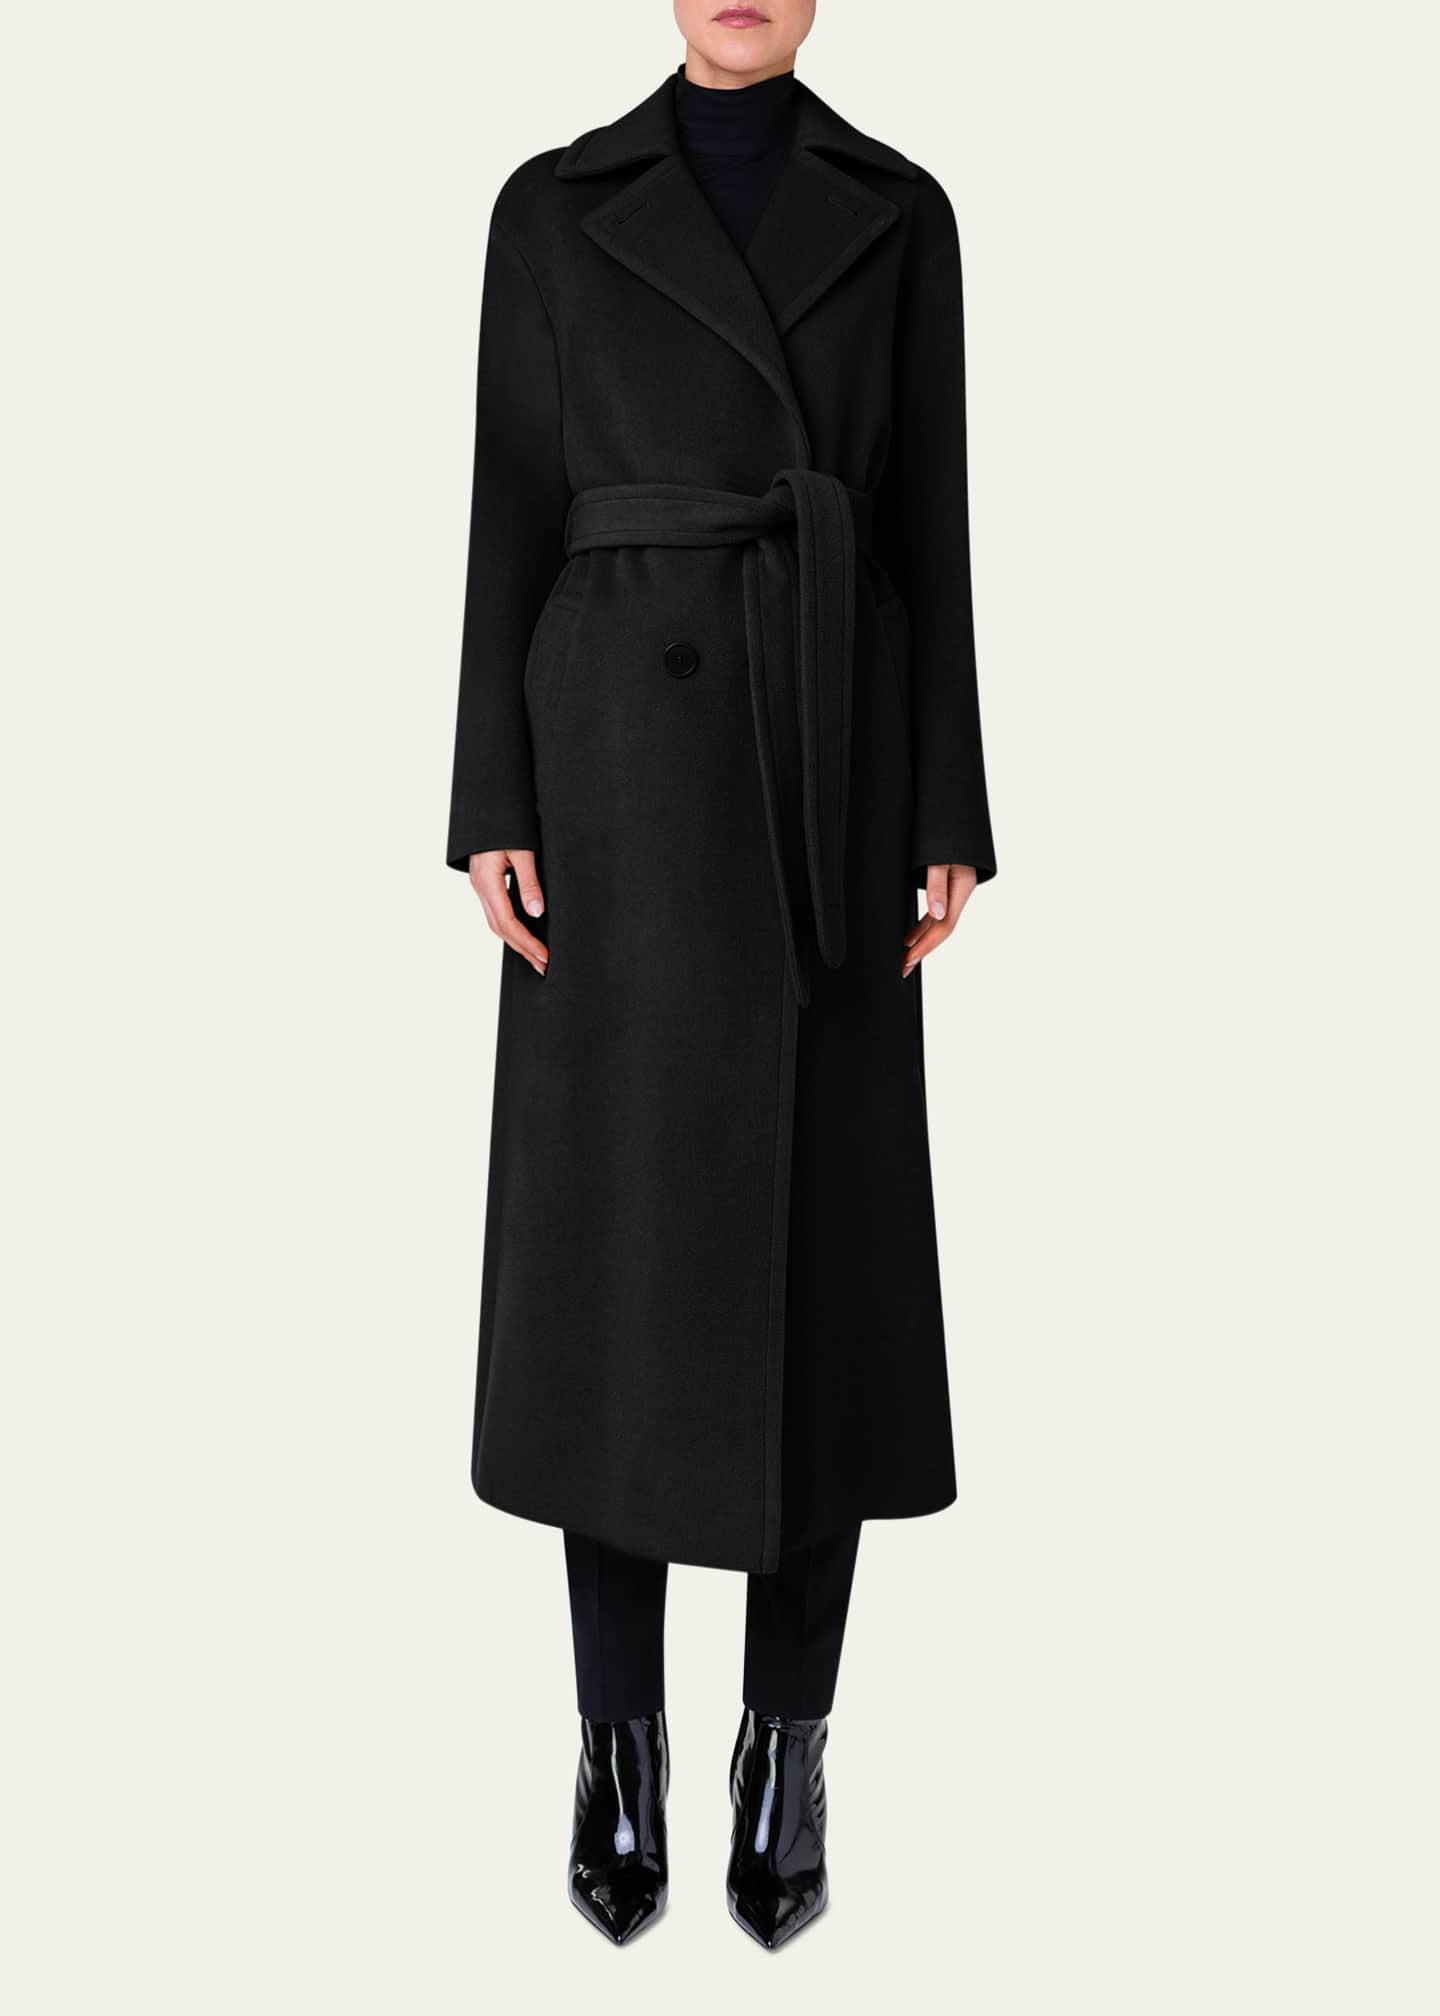 Akris punto Long Double-Breast Belted Wool-Cashmere Coat - Bergdorf Goodman